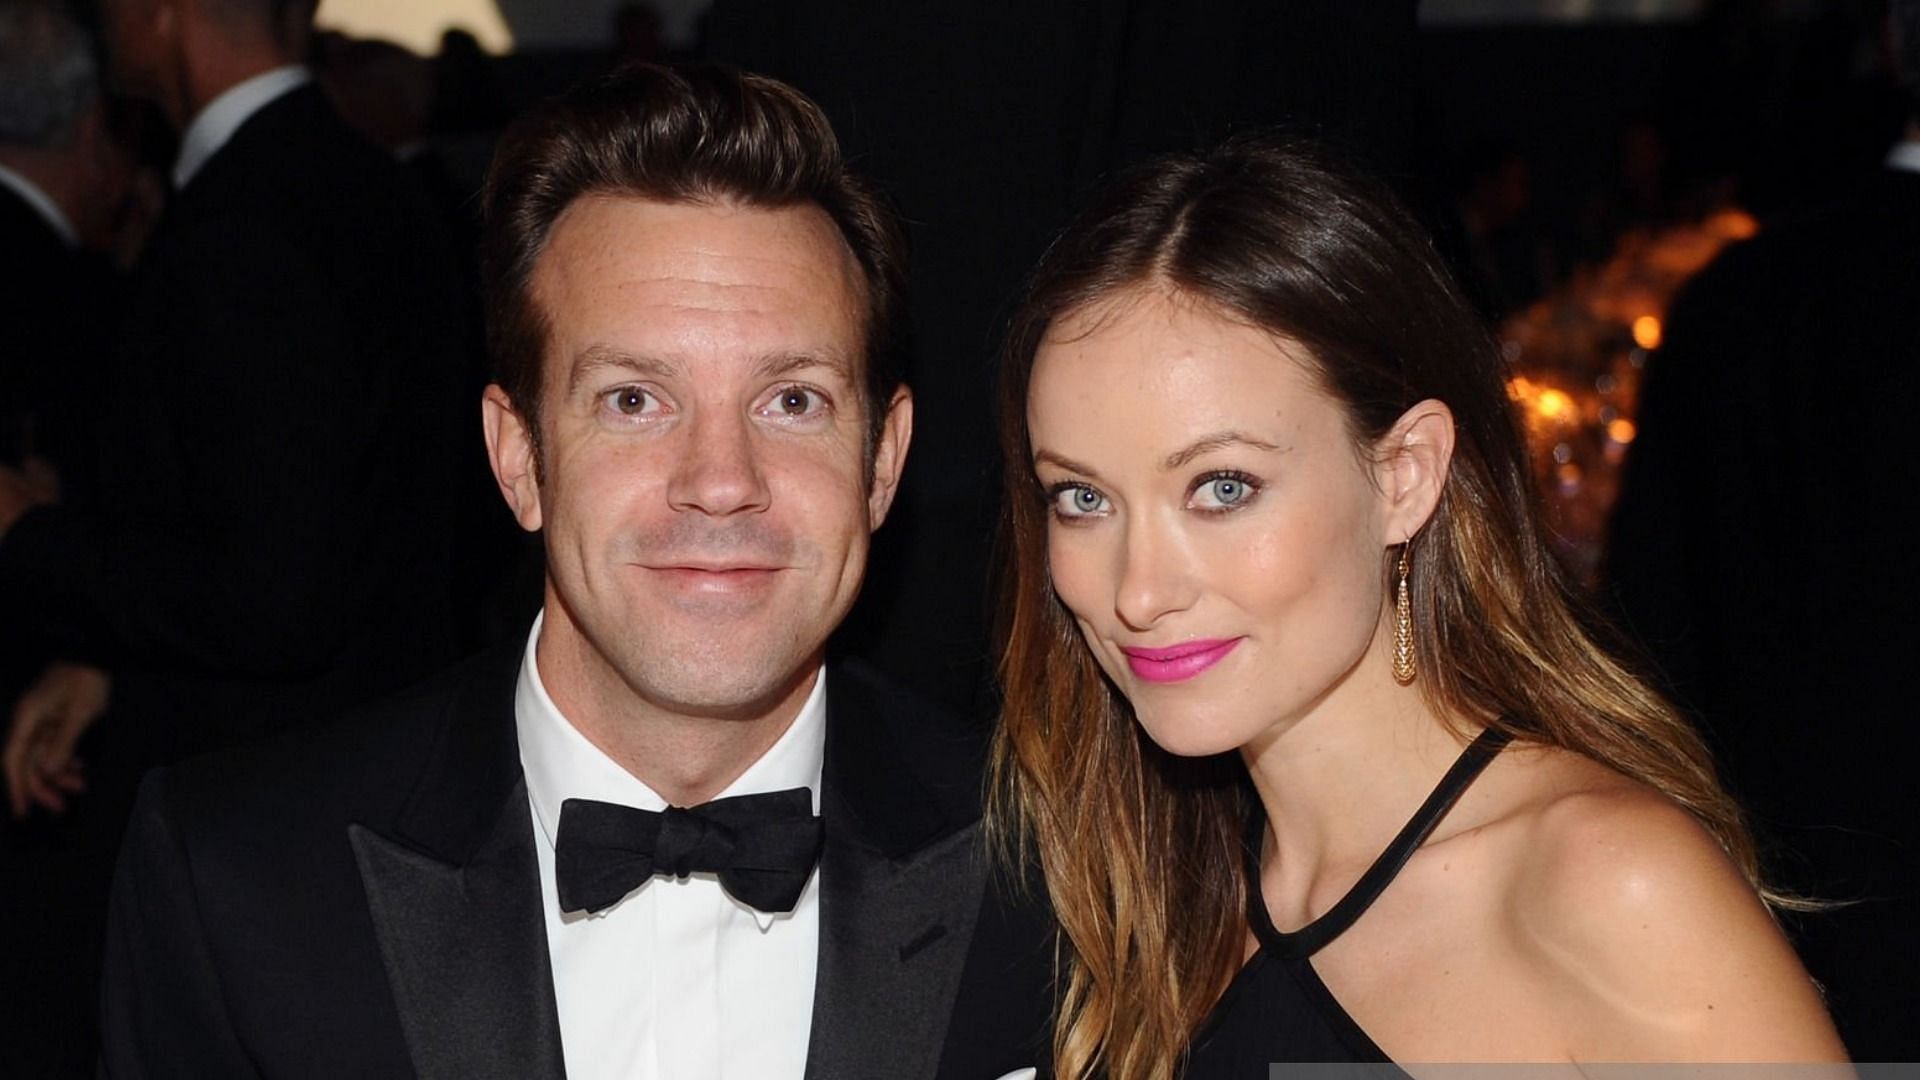 Jason Sudeikis served Olivia Wilde custody papers during &#039;Don&#039;t Worry Darling&#039; CinemaCon (Image via Stefanie Keenan/Getty Images)